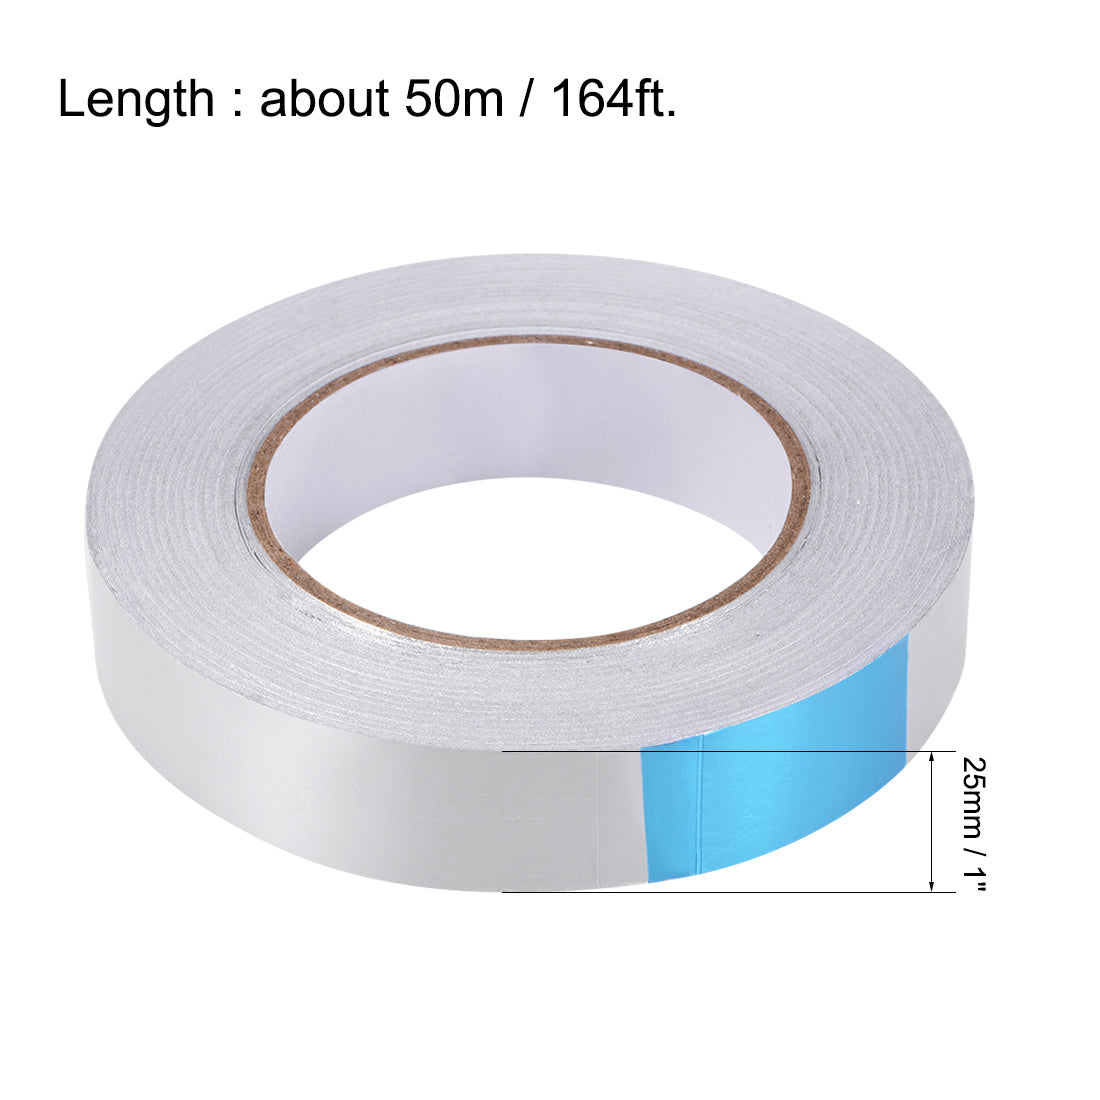 uxcell Uxcell Heat Resistant Tape - High Temperature Heat Transfer Tape Aluminum Foil Adhesive Tape 25mm x 50m(164ft)